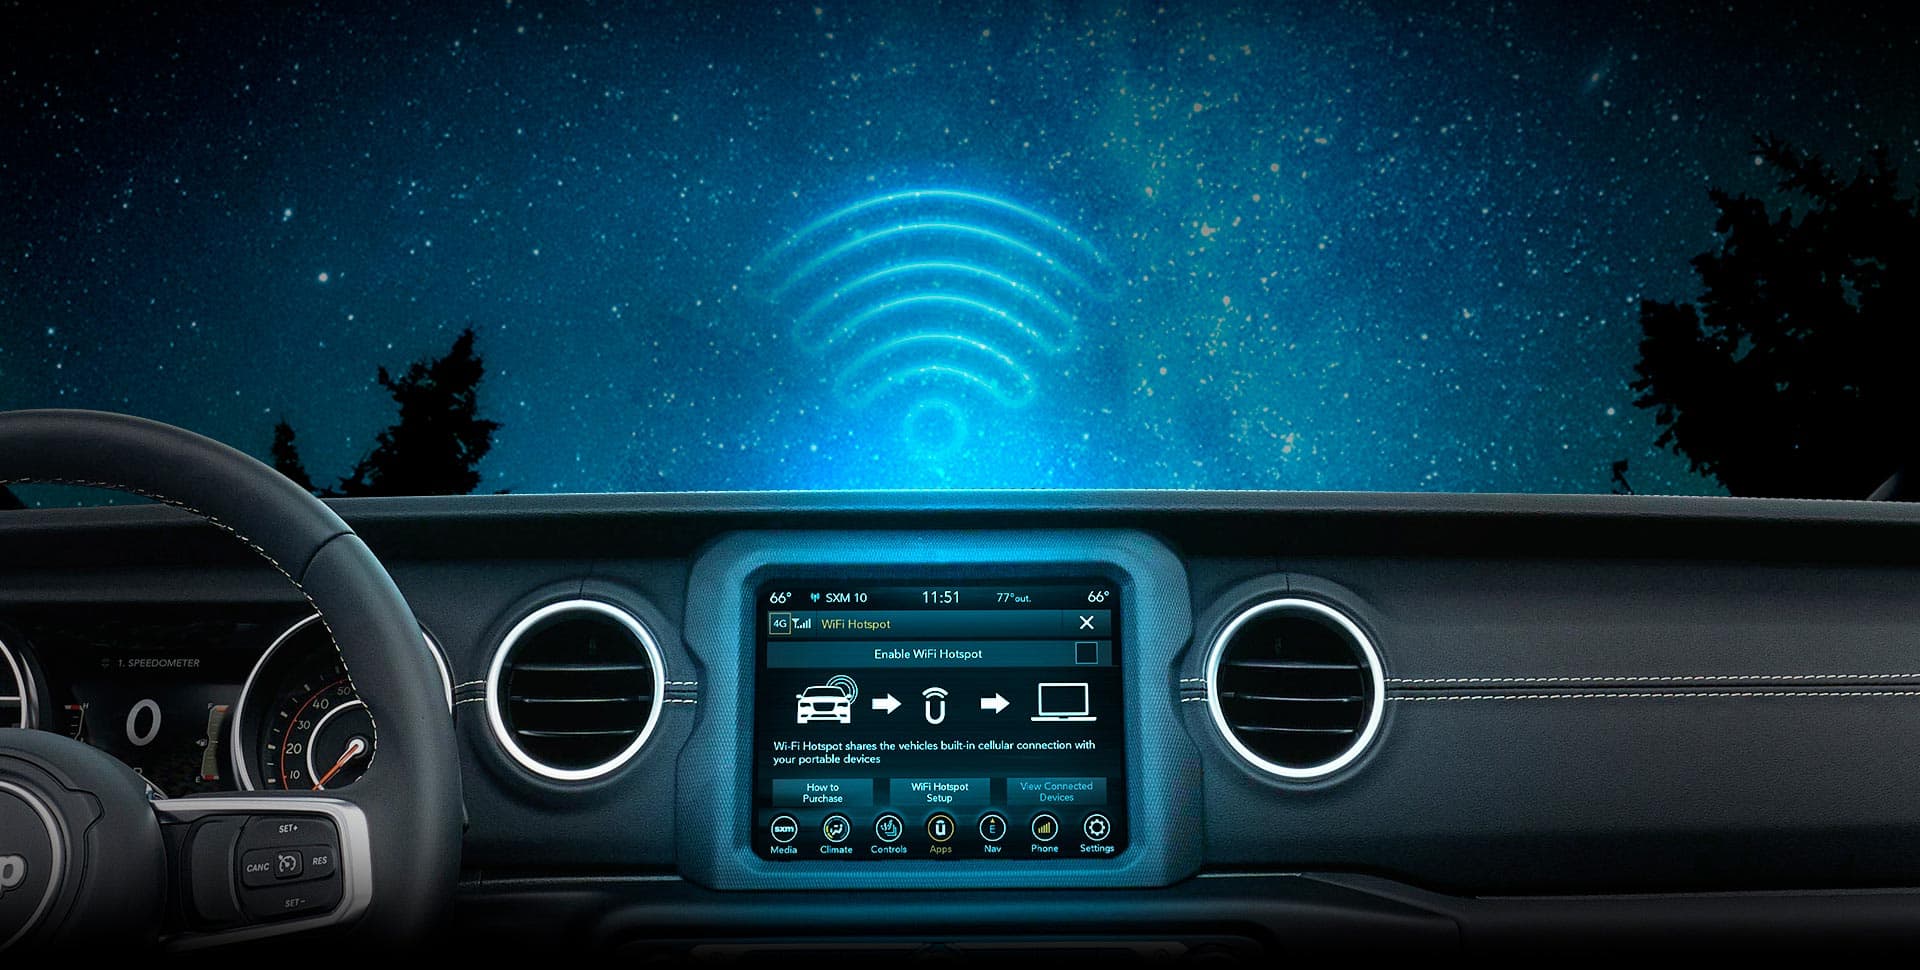 The Uconnect 8.4-inch touchscreen in the 2023 Jeep Gladiator displaying the Wi-Fi Hotspot screen.